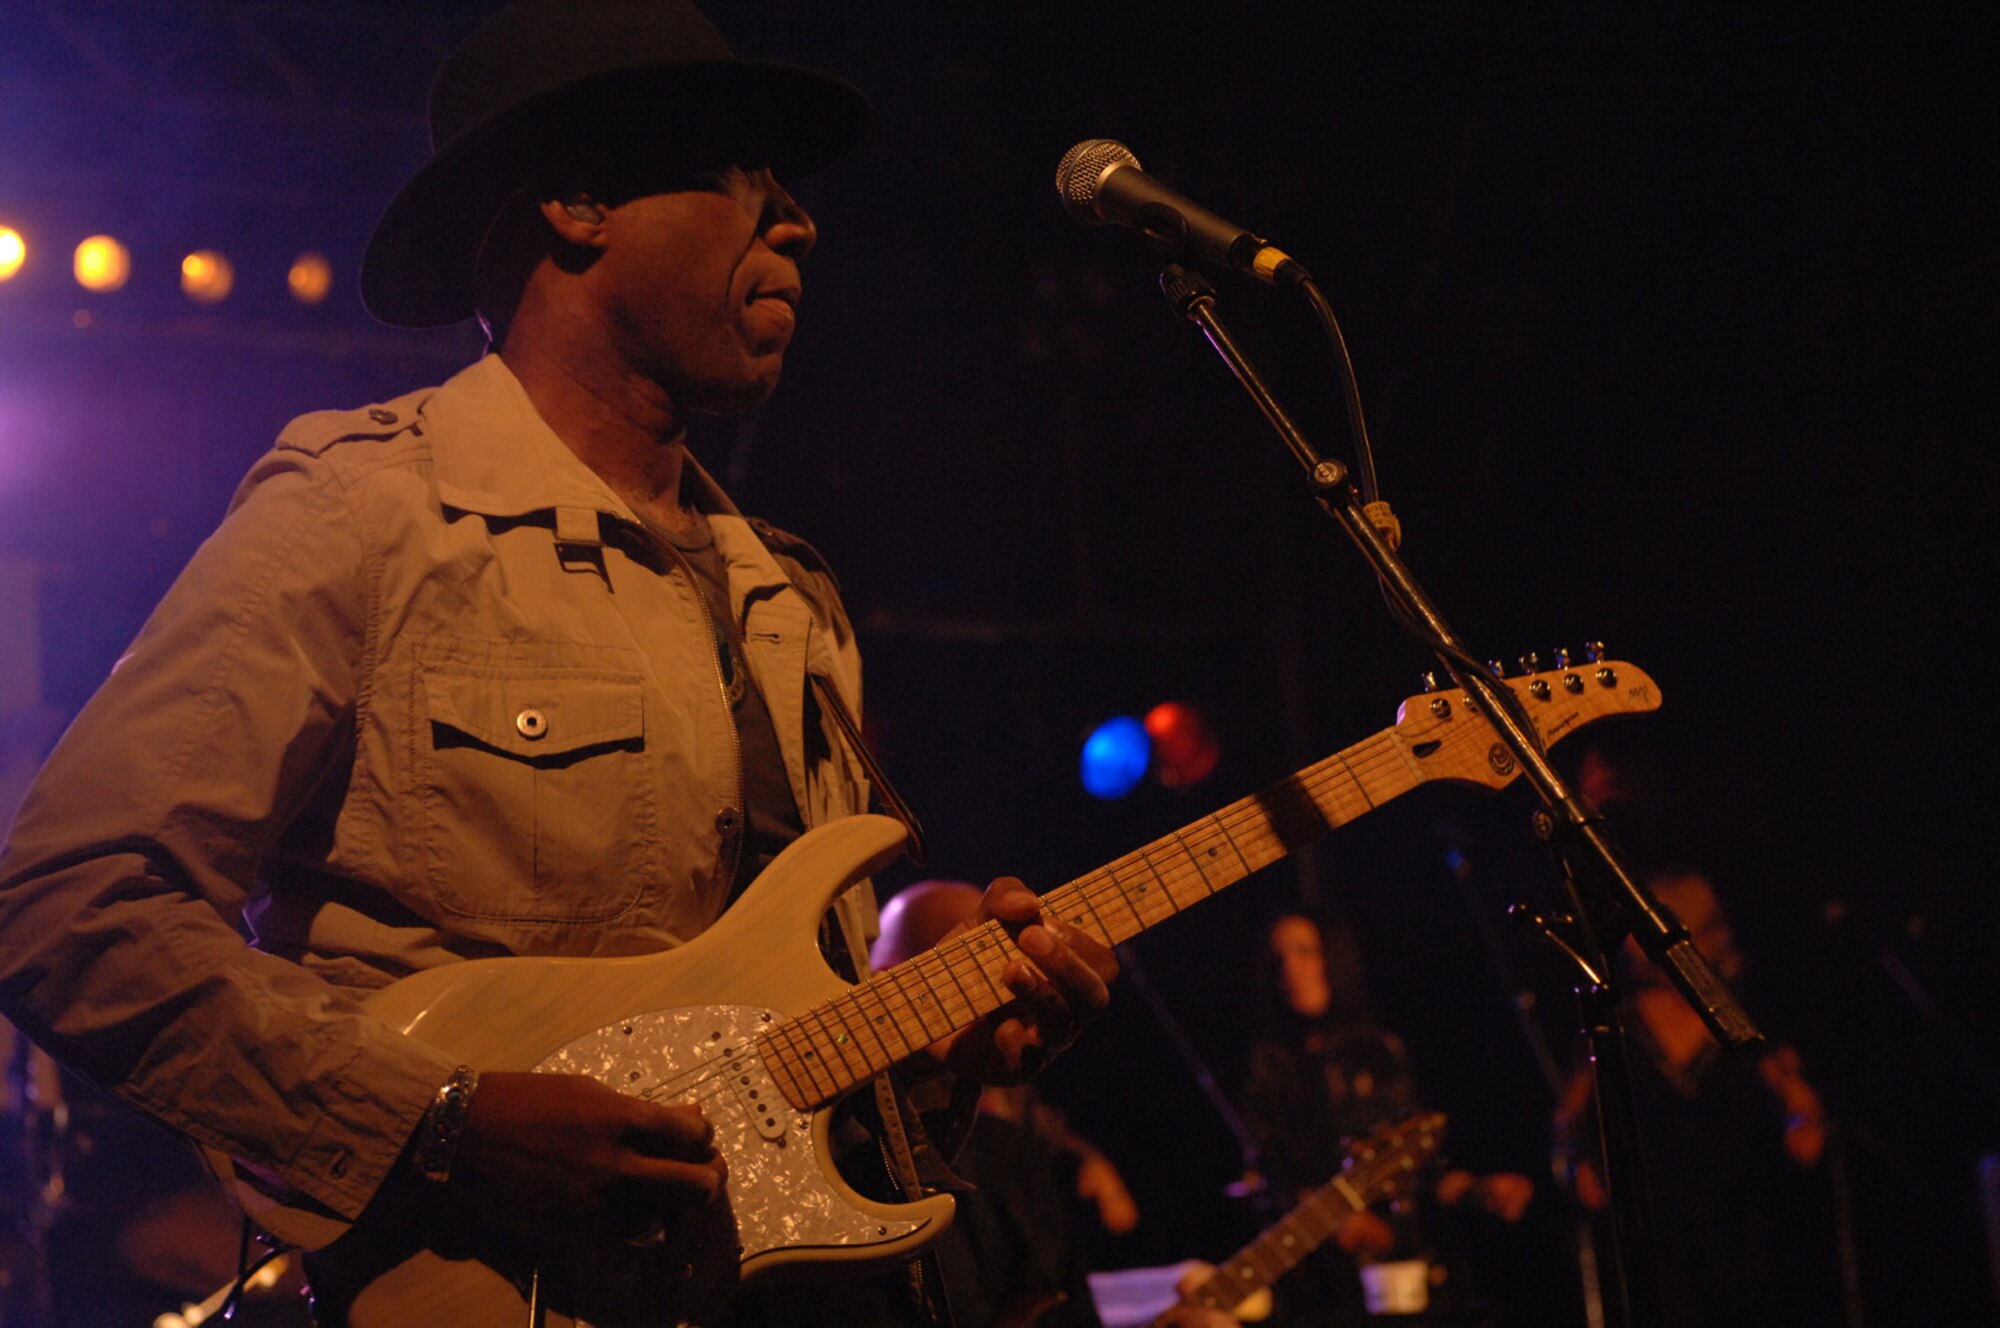 SPANGDAHLEM AIR BASE, GERMANY -- Kimo Williams, Lt. Dan Band electric guitarist and vocals, performs at Spangdahlem Air Base May 15. Mr. Williams is the son of a career an Airman, who enlisted in the Army July 4, 1969. He was assigned to a combat engineer company building roads and clearing land in the jungle in Viet Nam in 1970. To deal with the stress of combat he took to the guitar and was discovered by an Army entertainment director who suggested that he form a band to perform for the troops in the field. For the next two months Mr. Williams and his band, "The Soul Coordinators" traveled to remote fighting areas throughout Viet Nam. (US Air Force photo/Airman 1st Class Stephanie Moore)